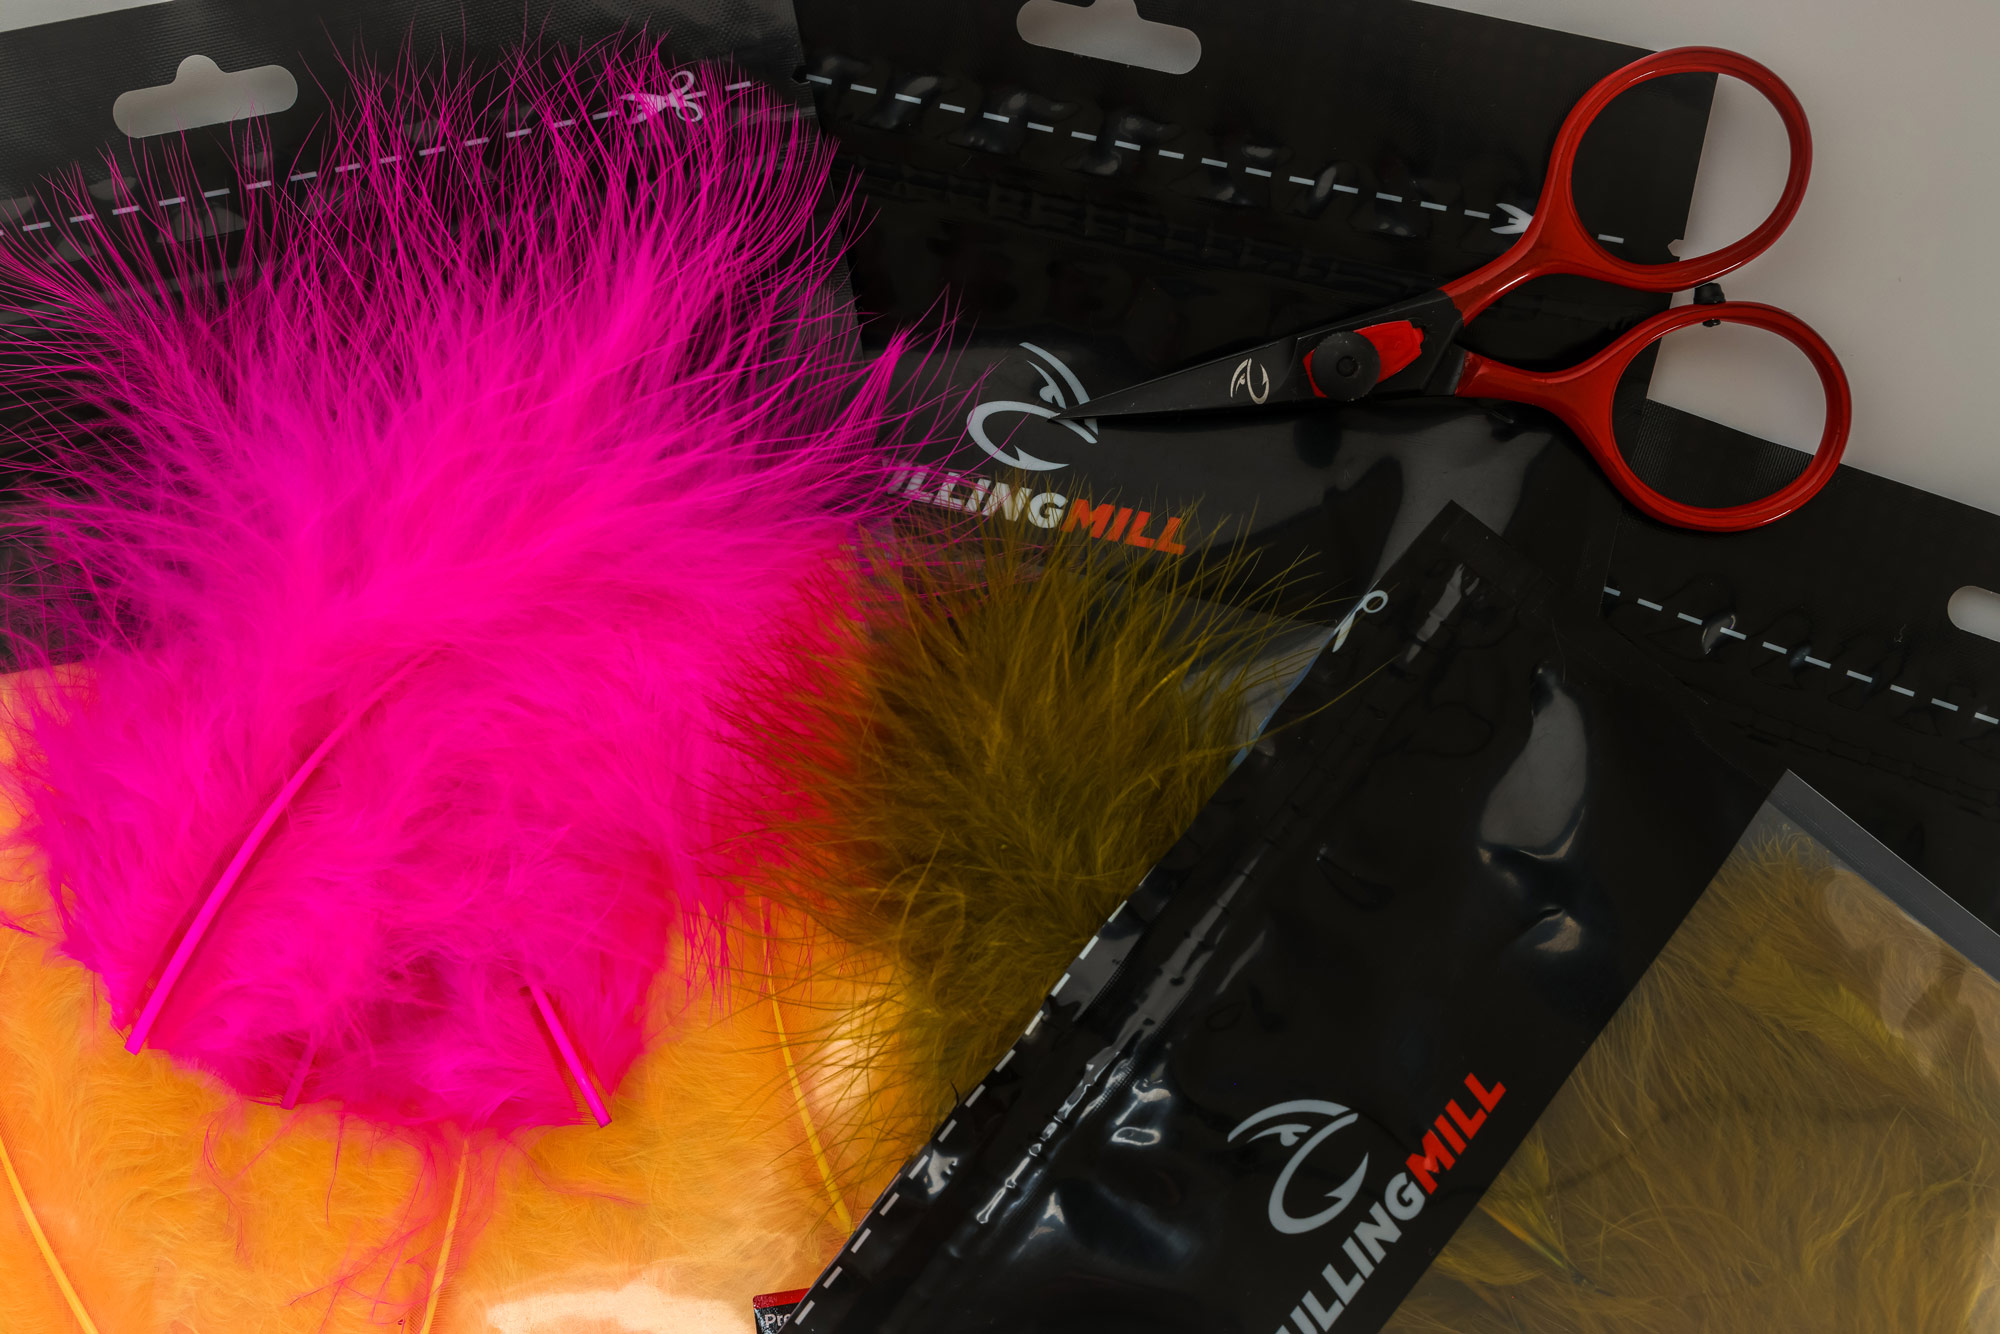 Variety Of Soft And Fluffy Wholesale Fly Tying Feathers 